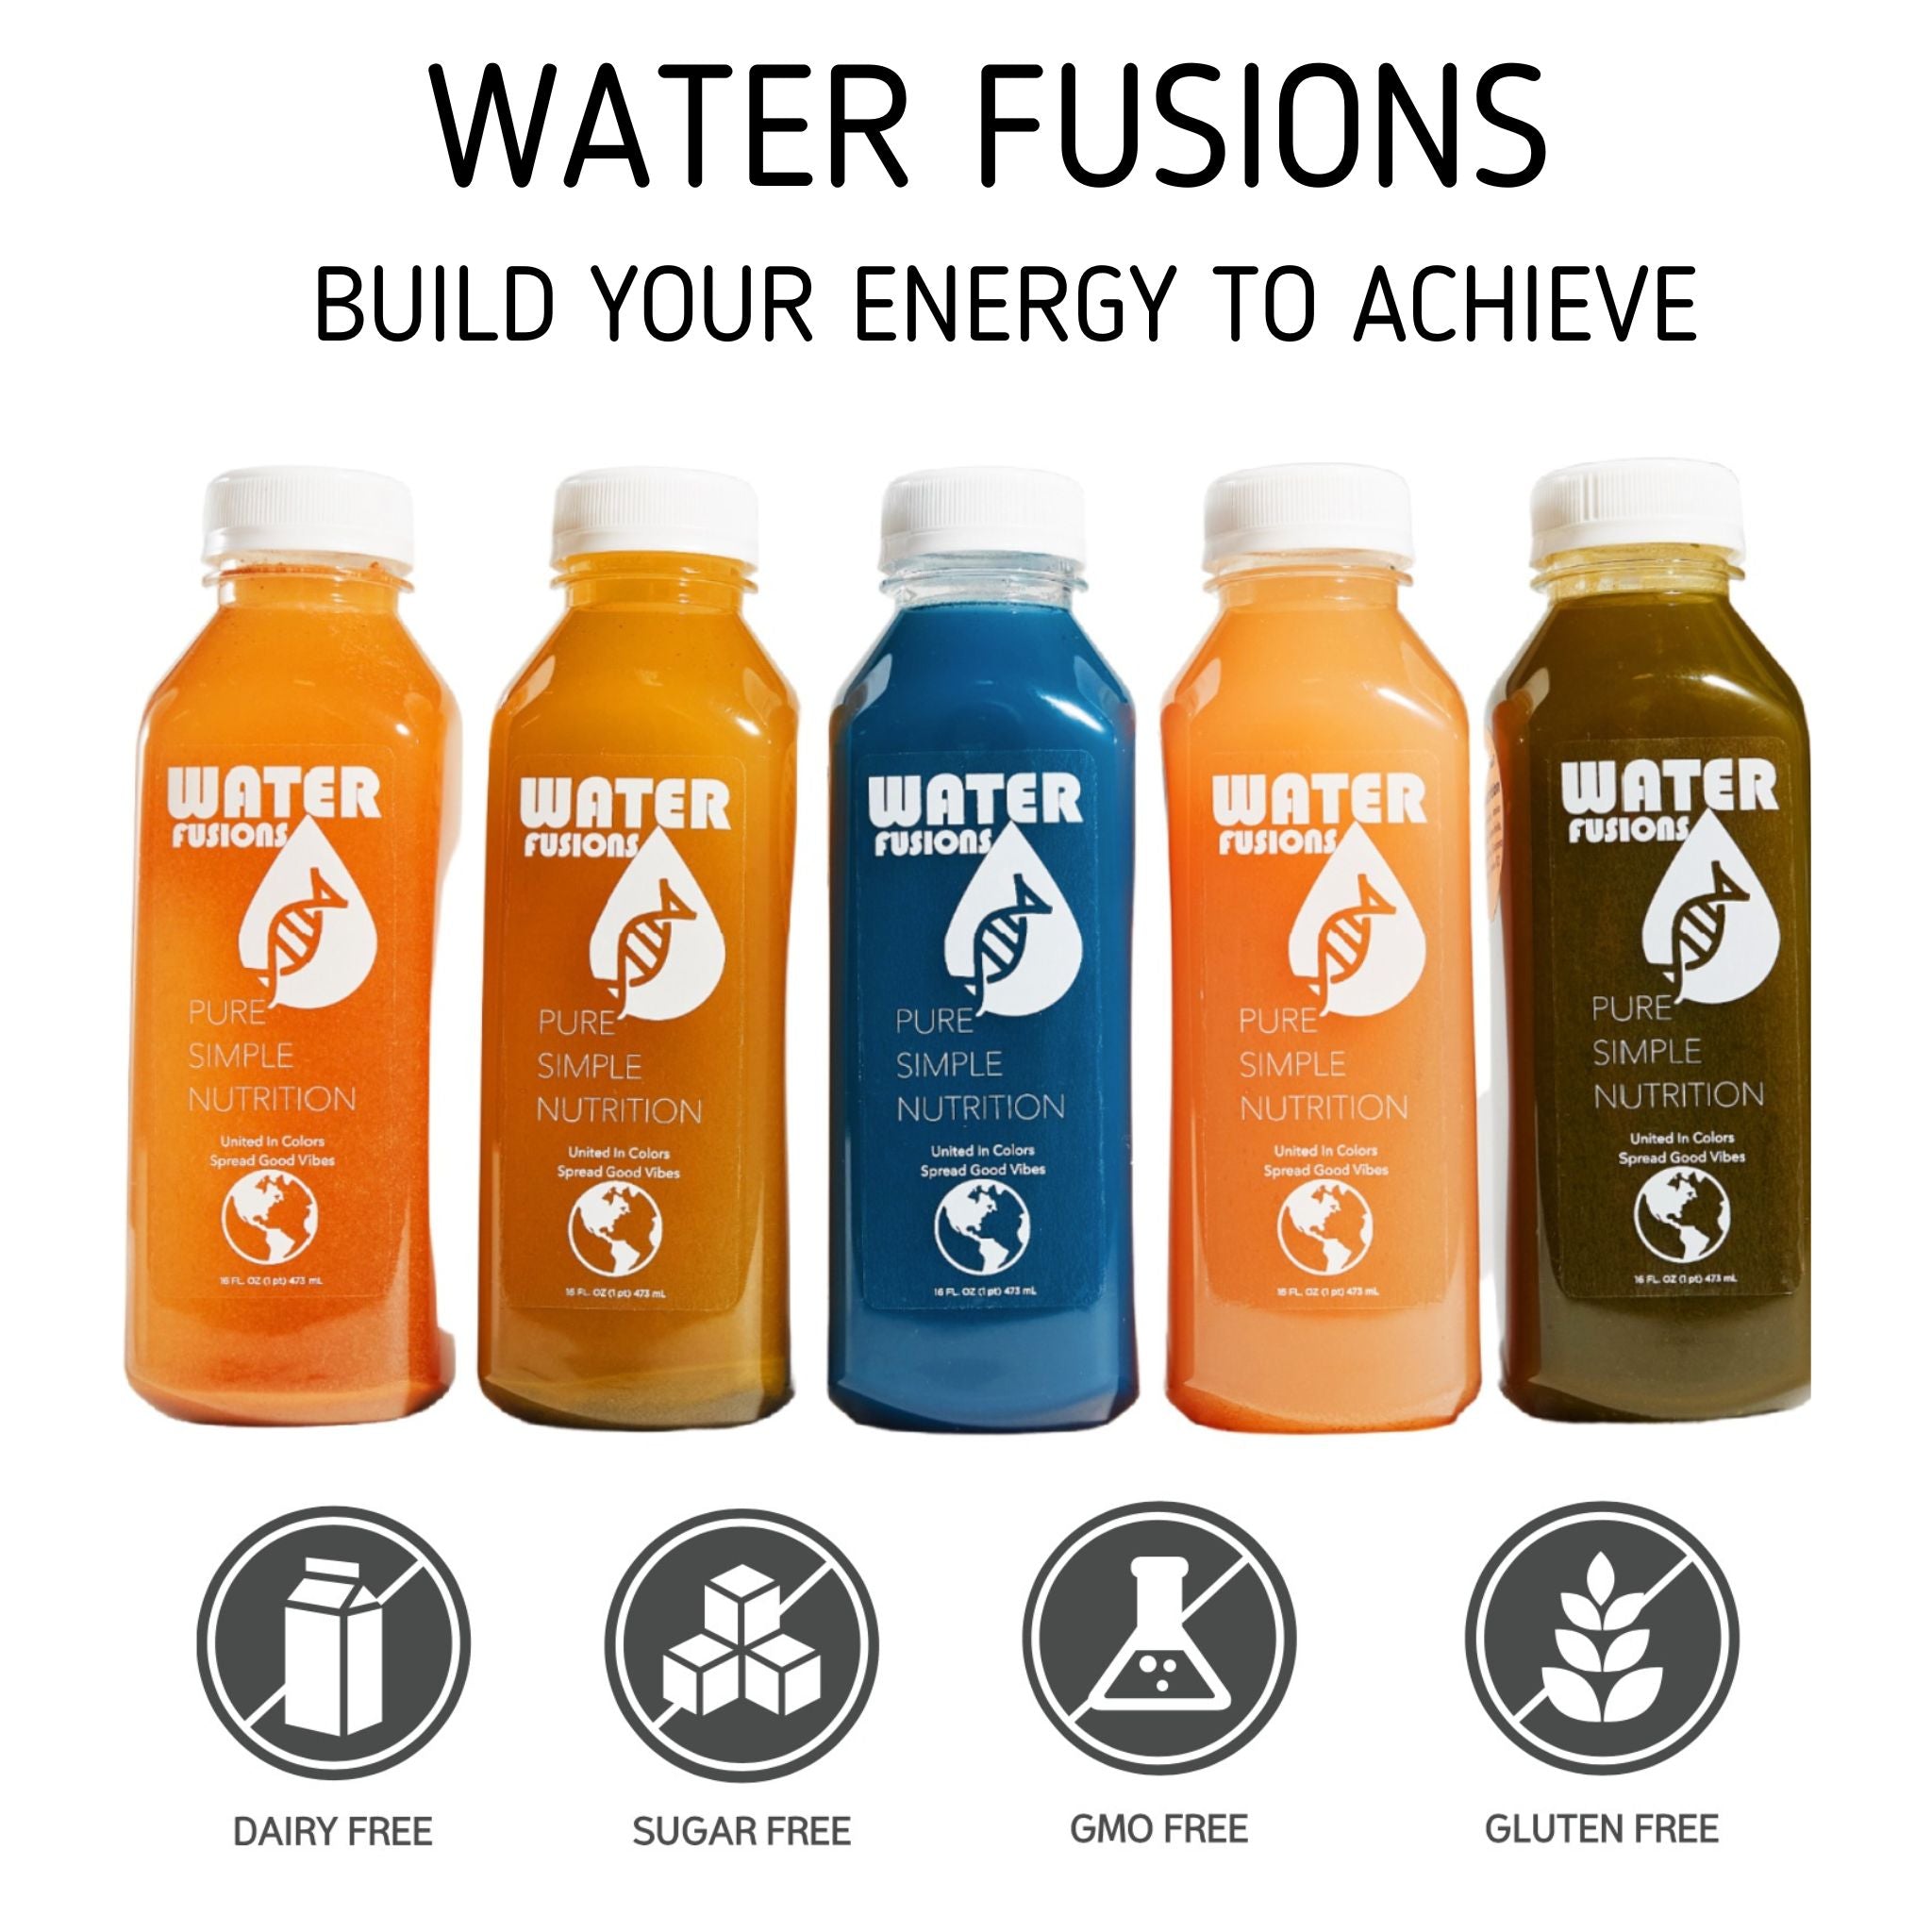 Bio Nutrition Hack - Quantum matches you to alkaline Water Fusions that restore your inner balance in 24hrs.